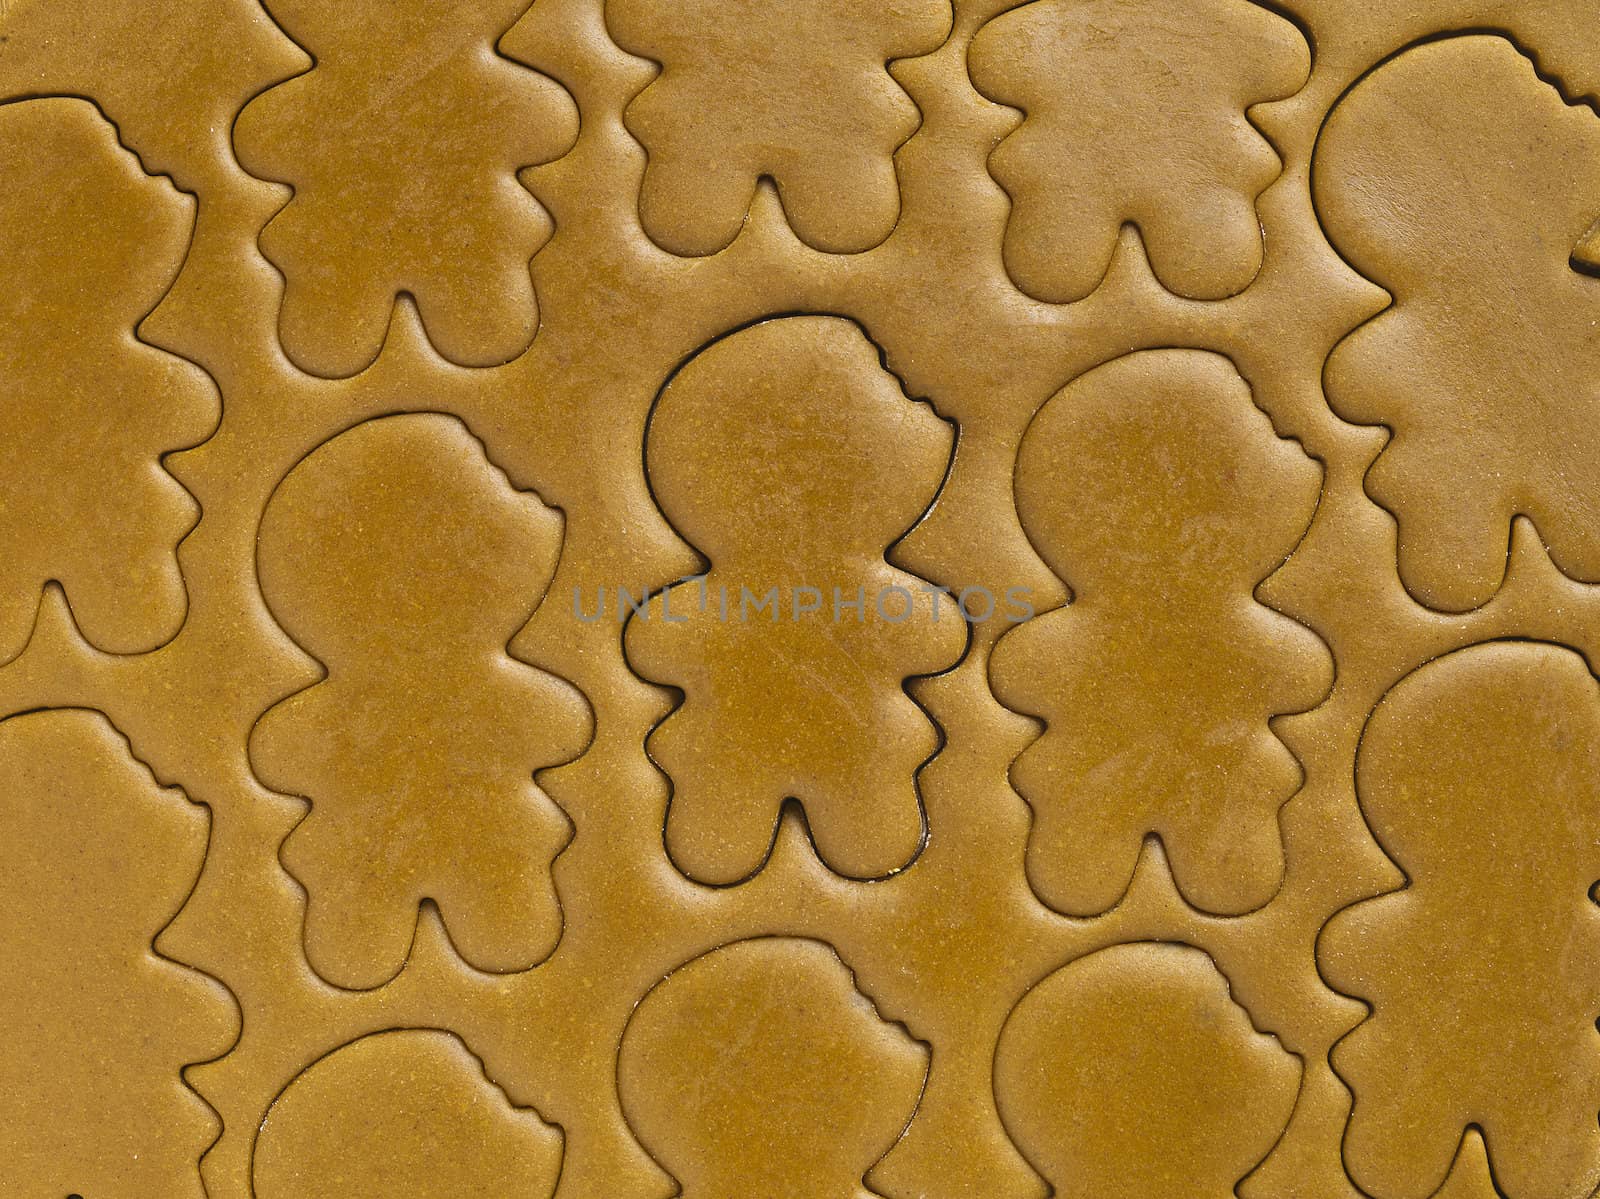 image of gingerbread man shapes on dough by kozzi